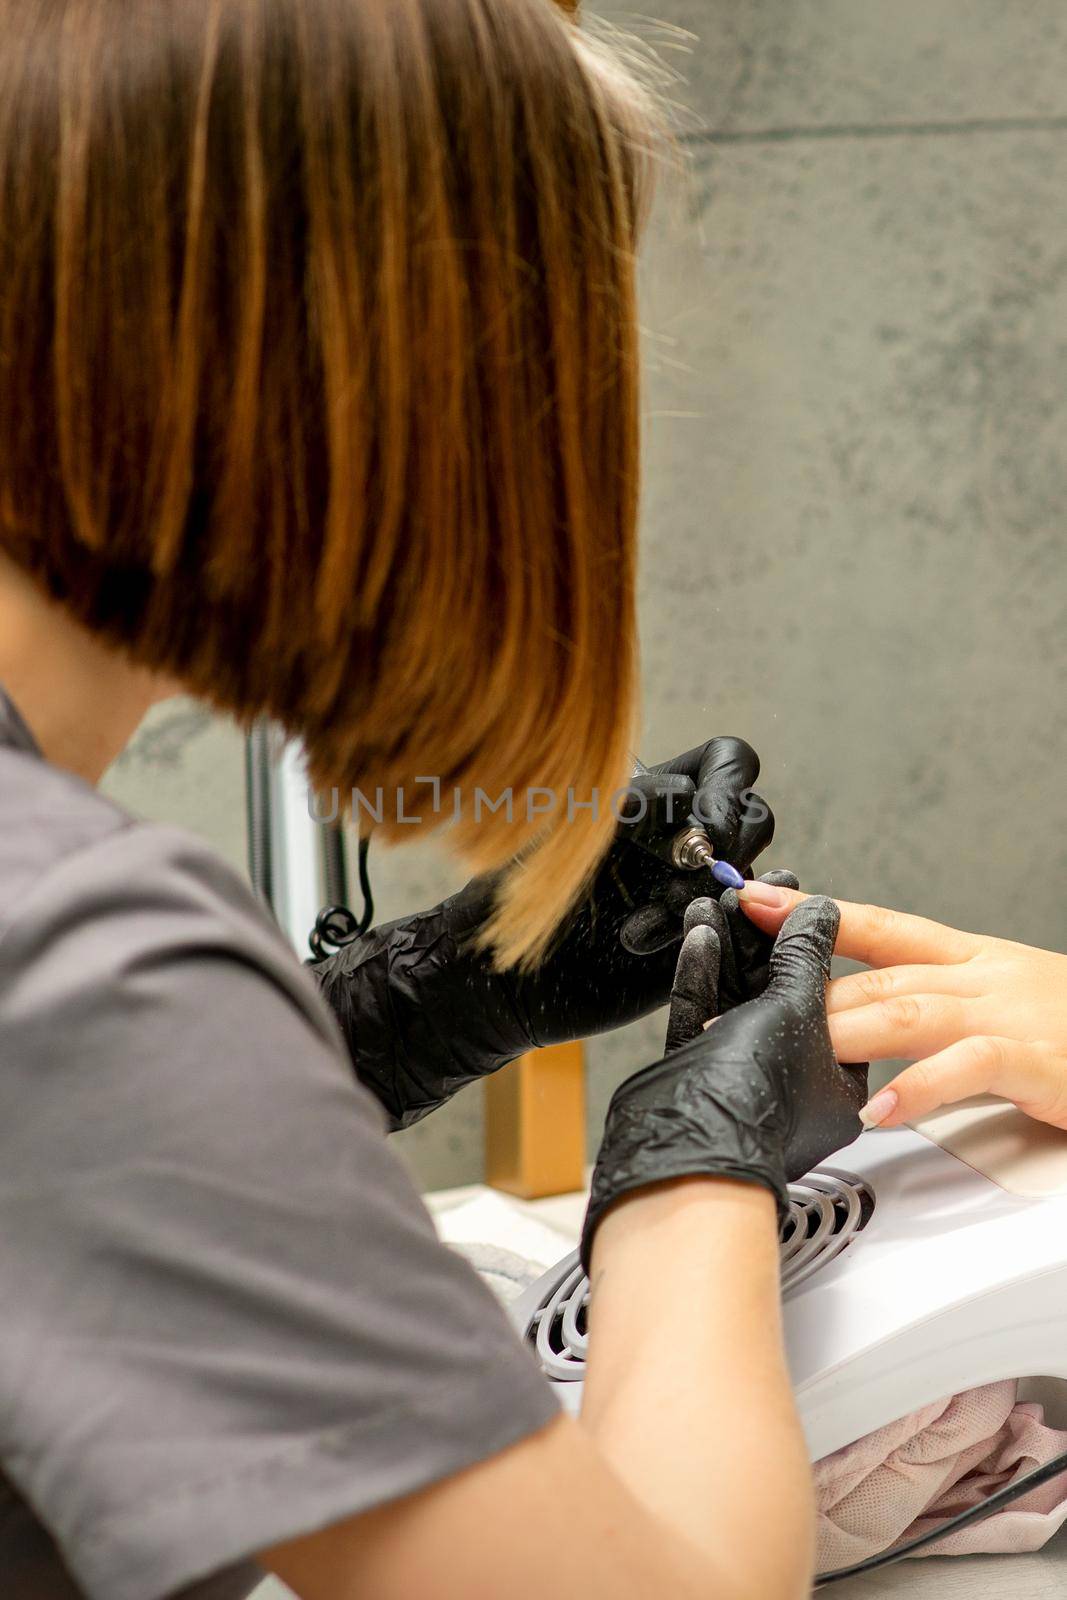 Manicure master in rubber gloves applies an electric nail file to remove the nail polish in a nail salon. by okskukuruza